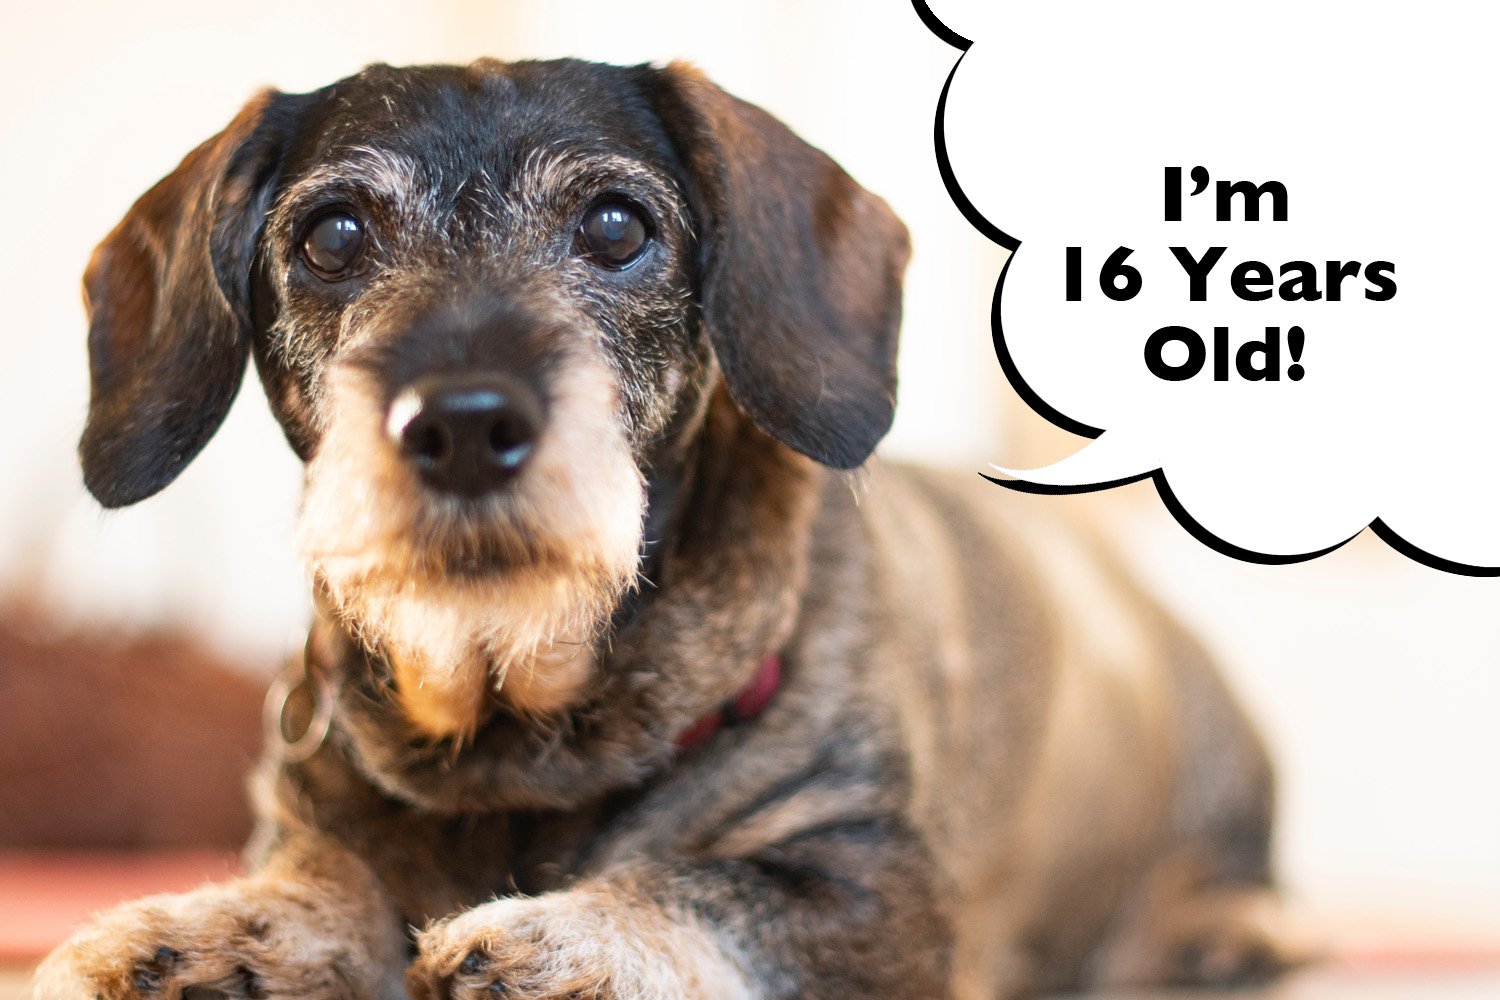 What Is The Life Expectancy Of A Dachshund?